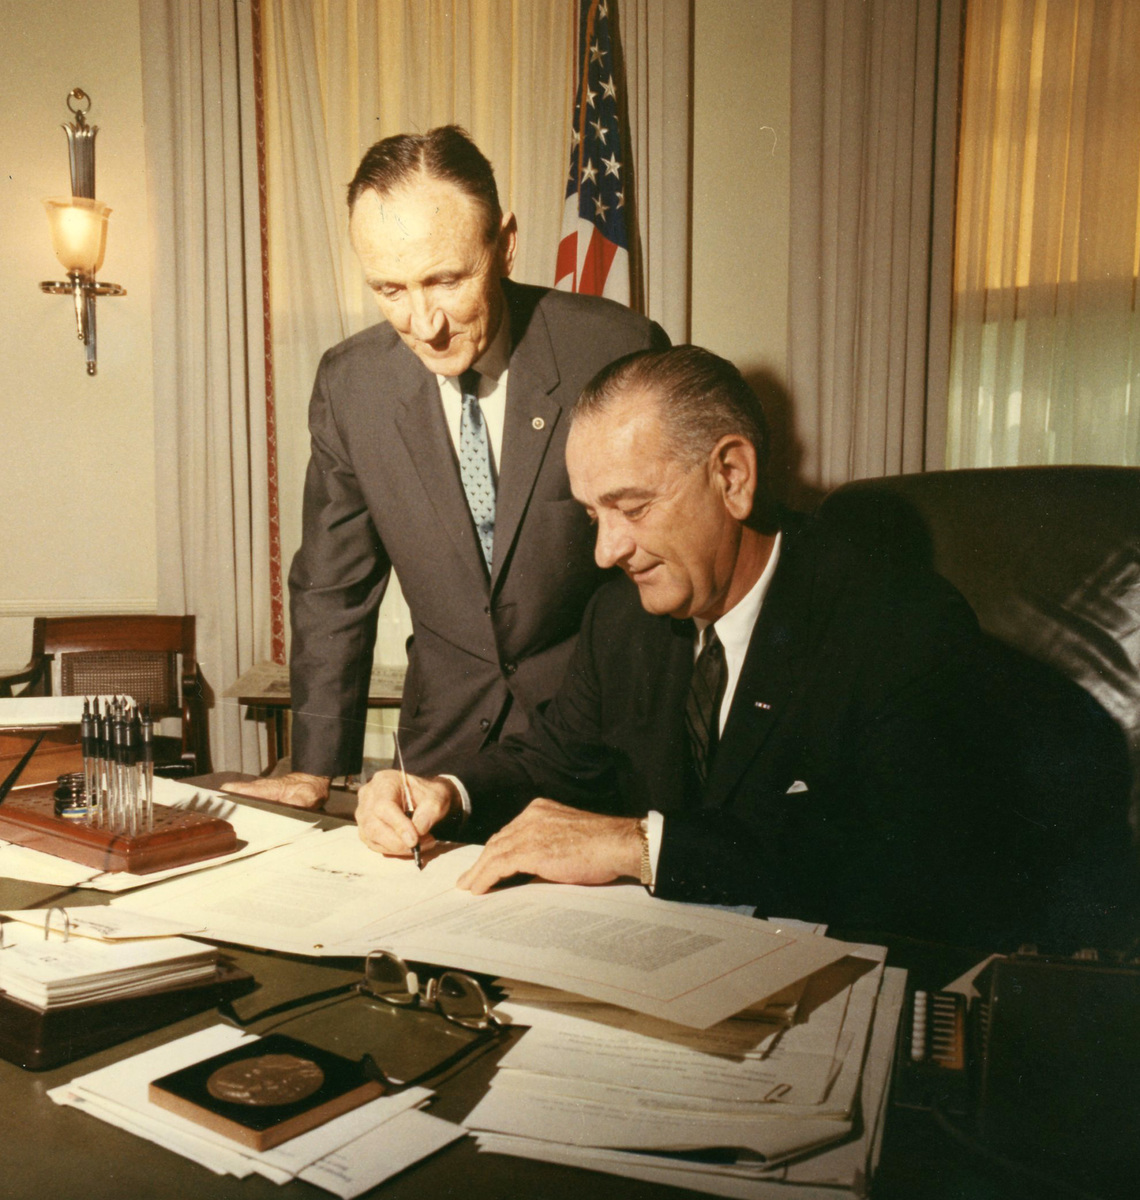 Senator Mike Mansfield leaning over President Lyndon Johnson who is seated at a typewriter.